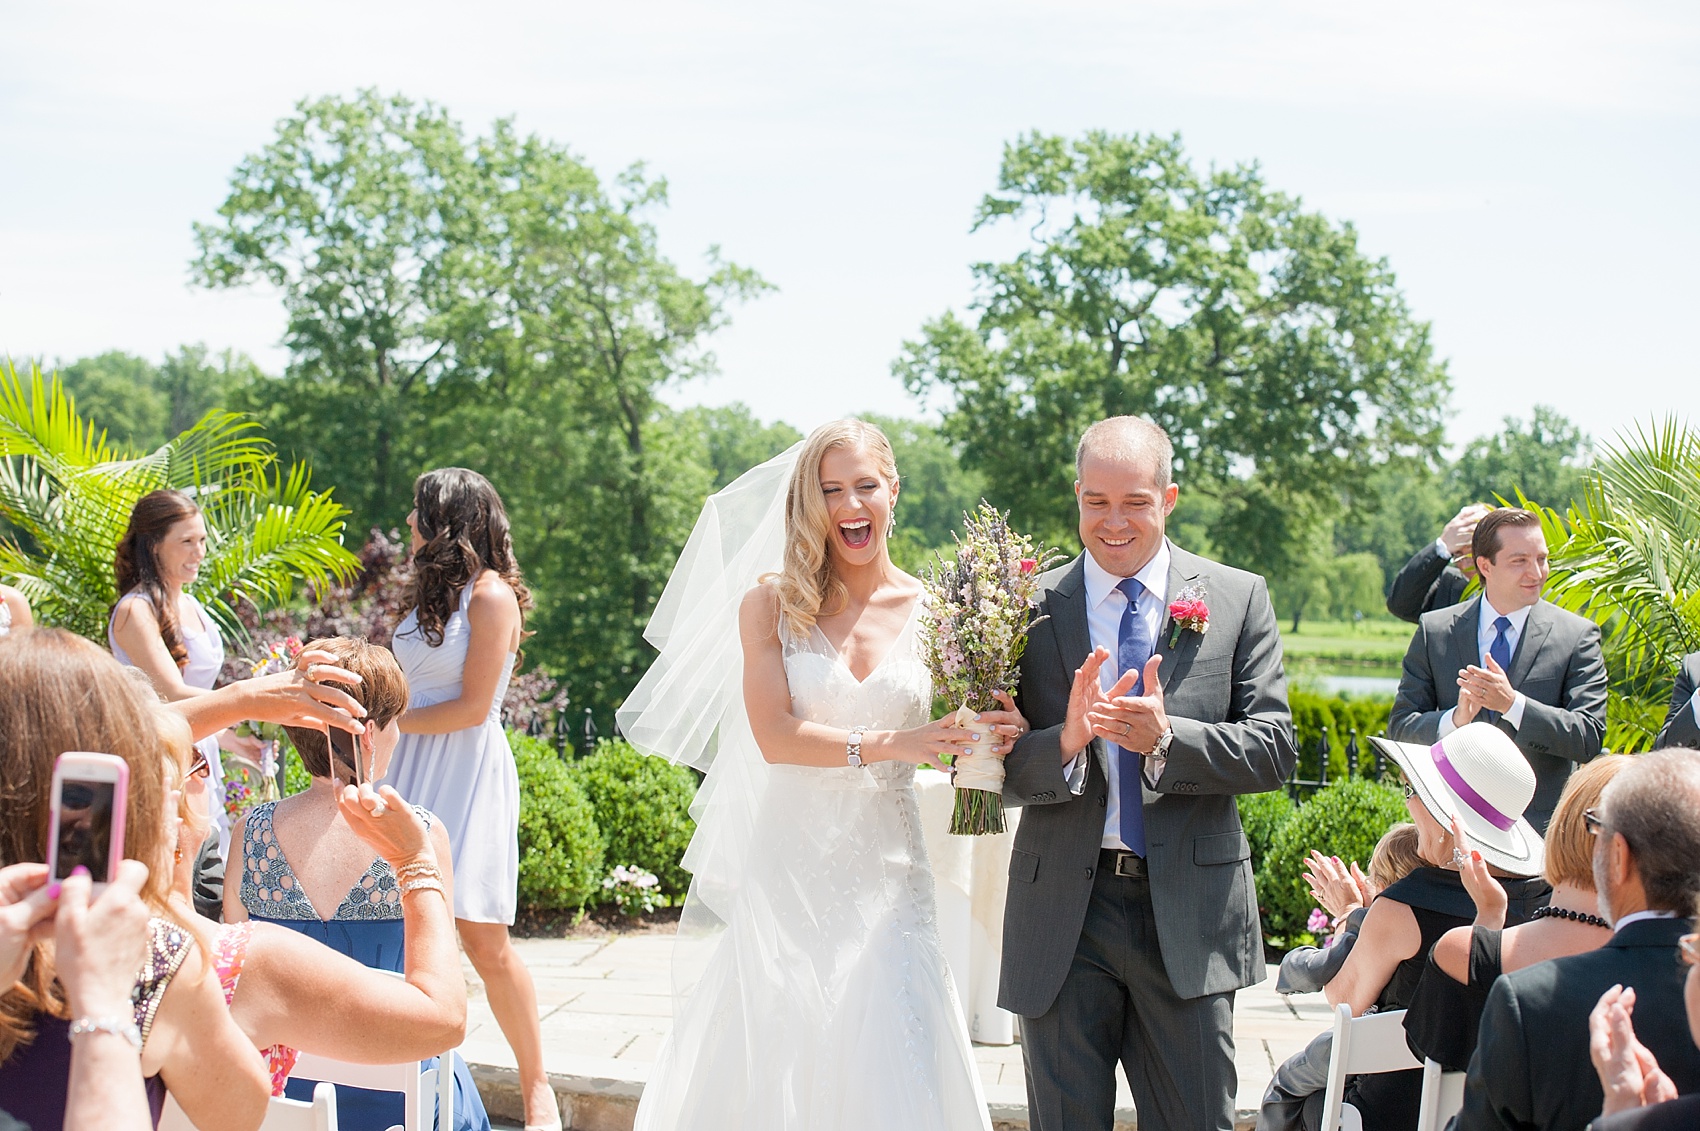 Outdoor summer wedding ceremony at The Park Savoy in New Jersey. Photo by Mikkel Paige Photography.